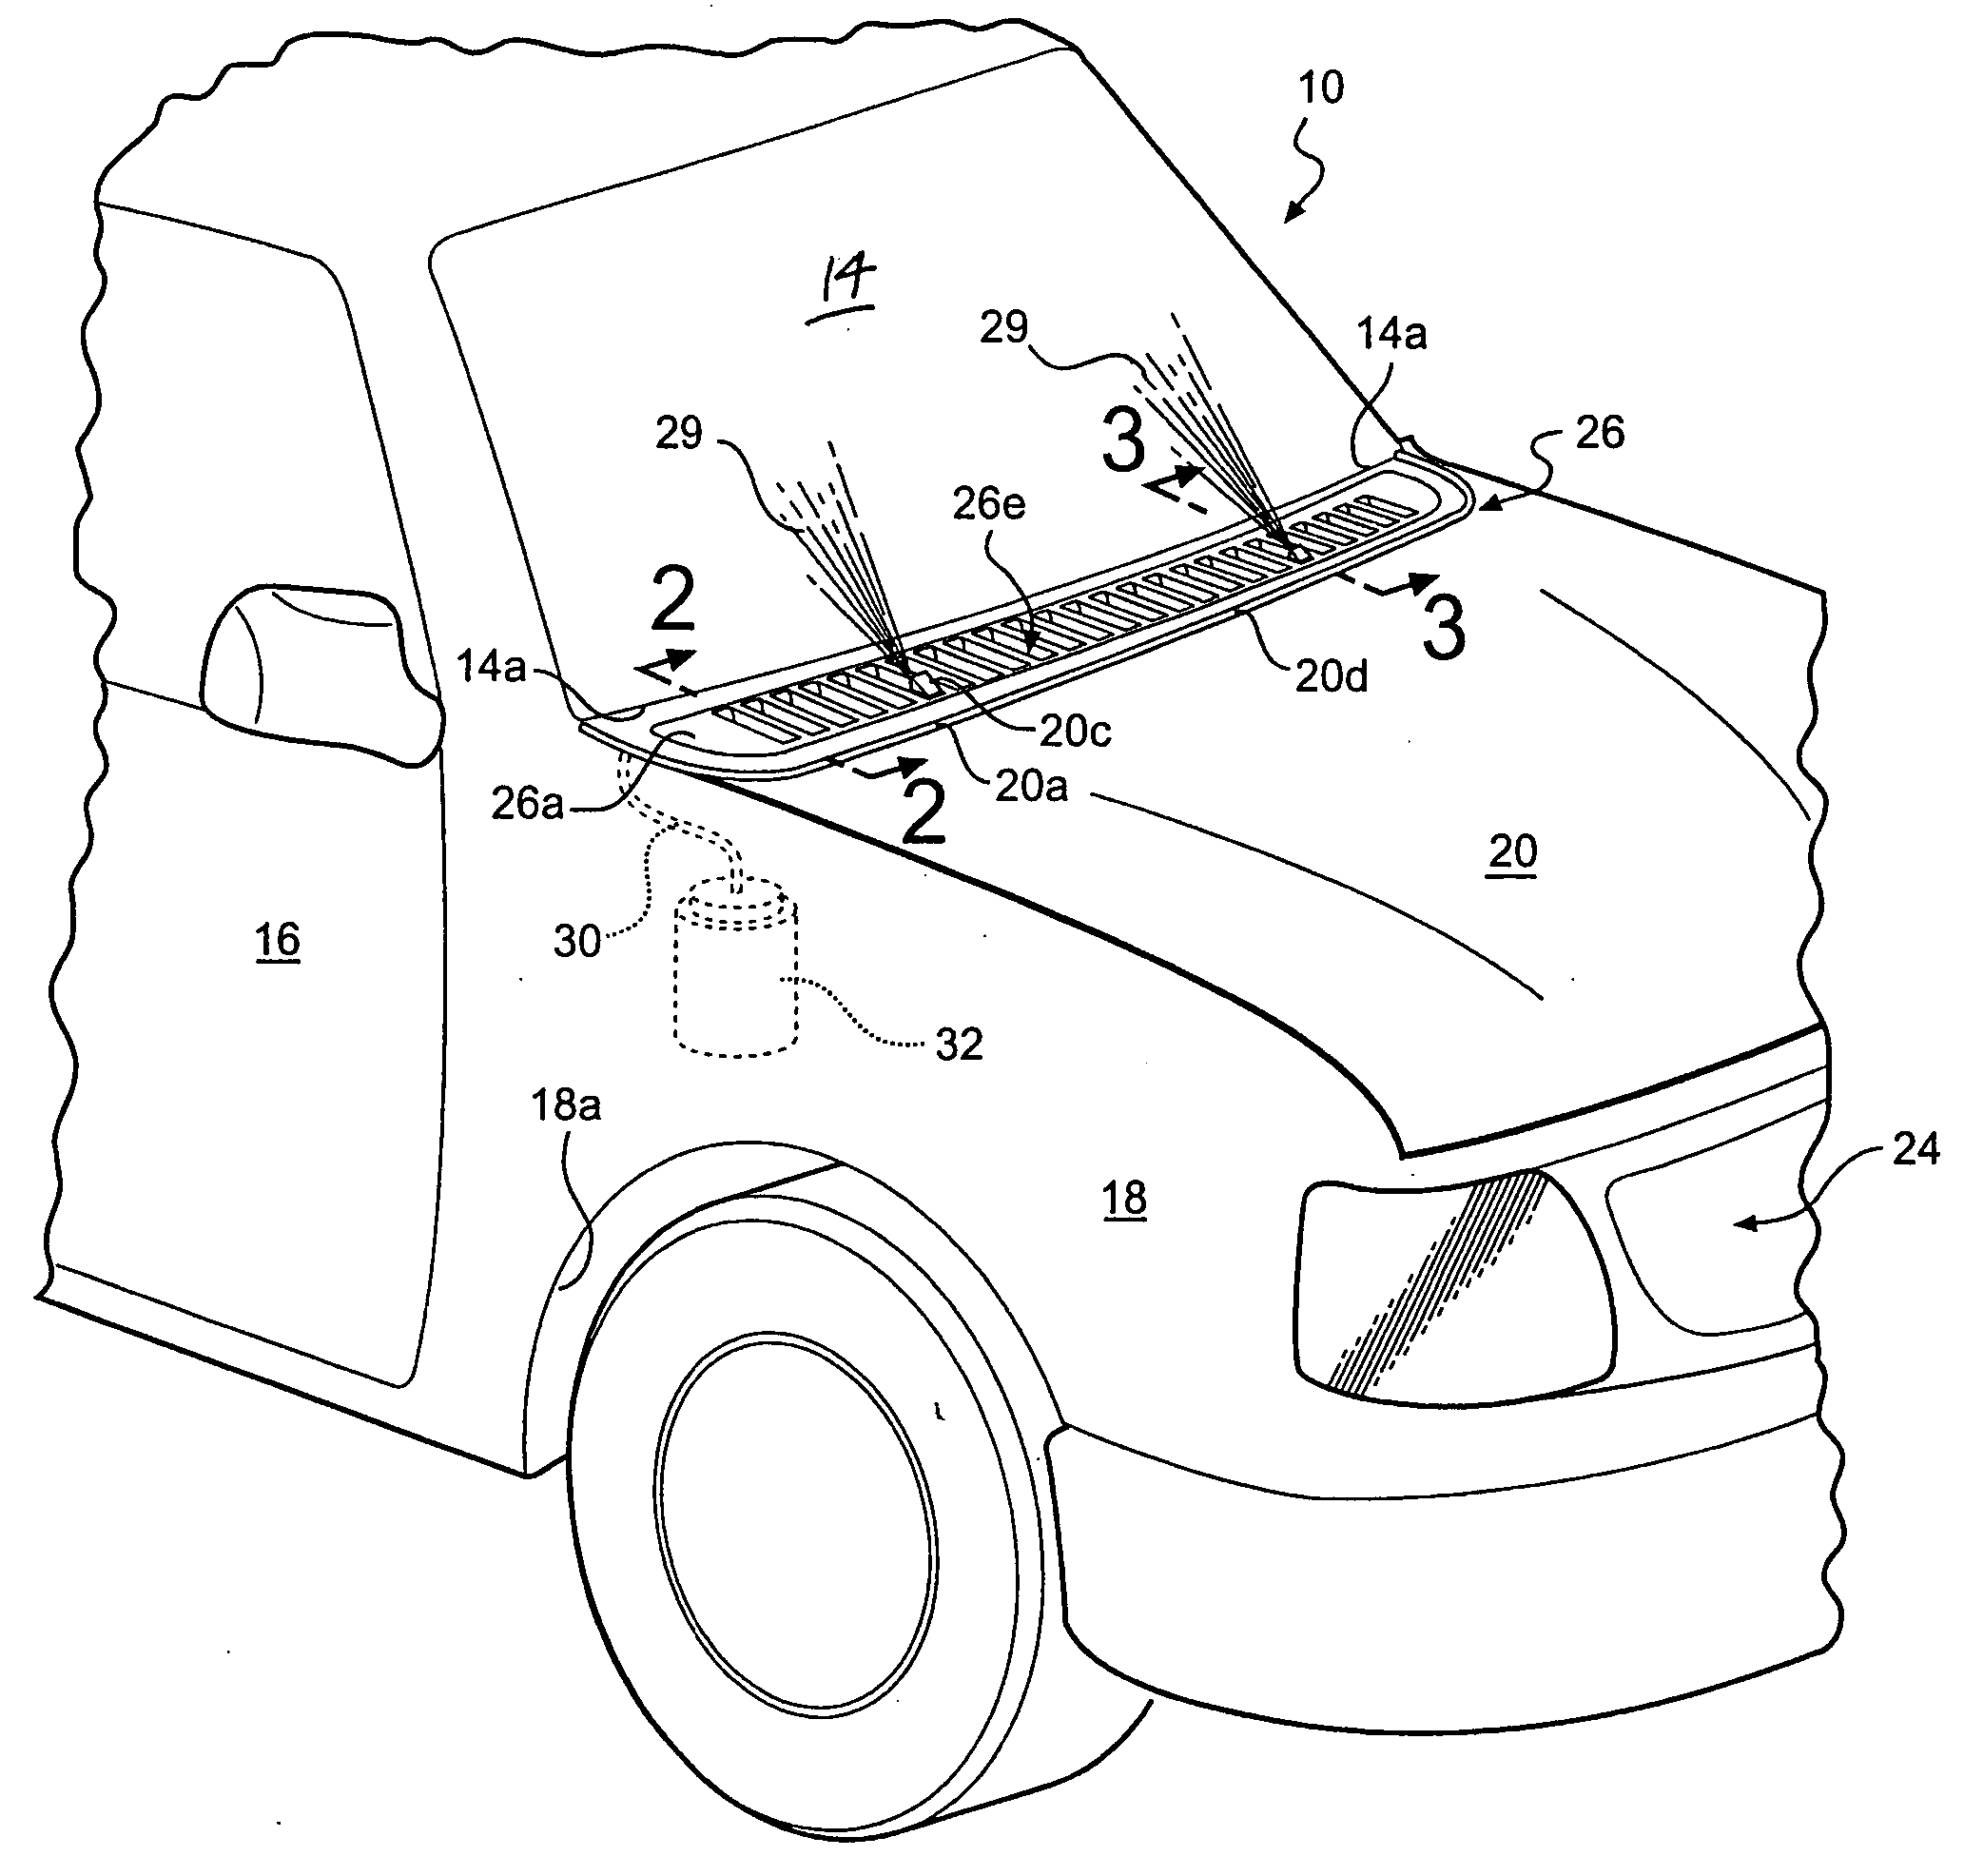 Cowl grille structure with integral washer fluid channel